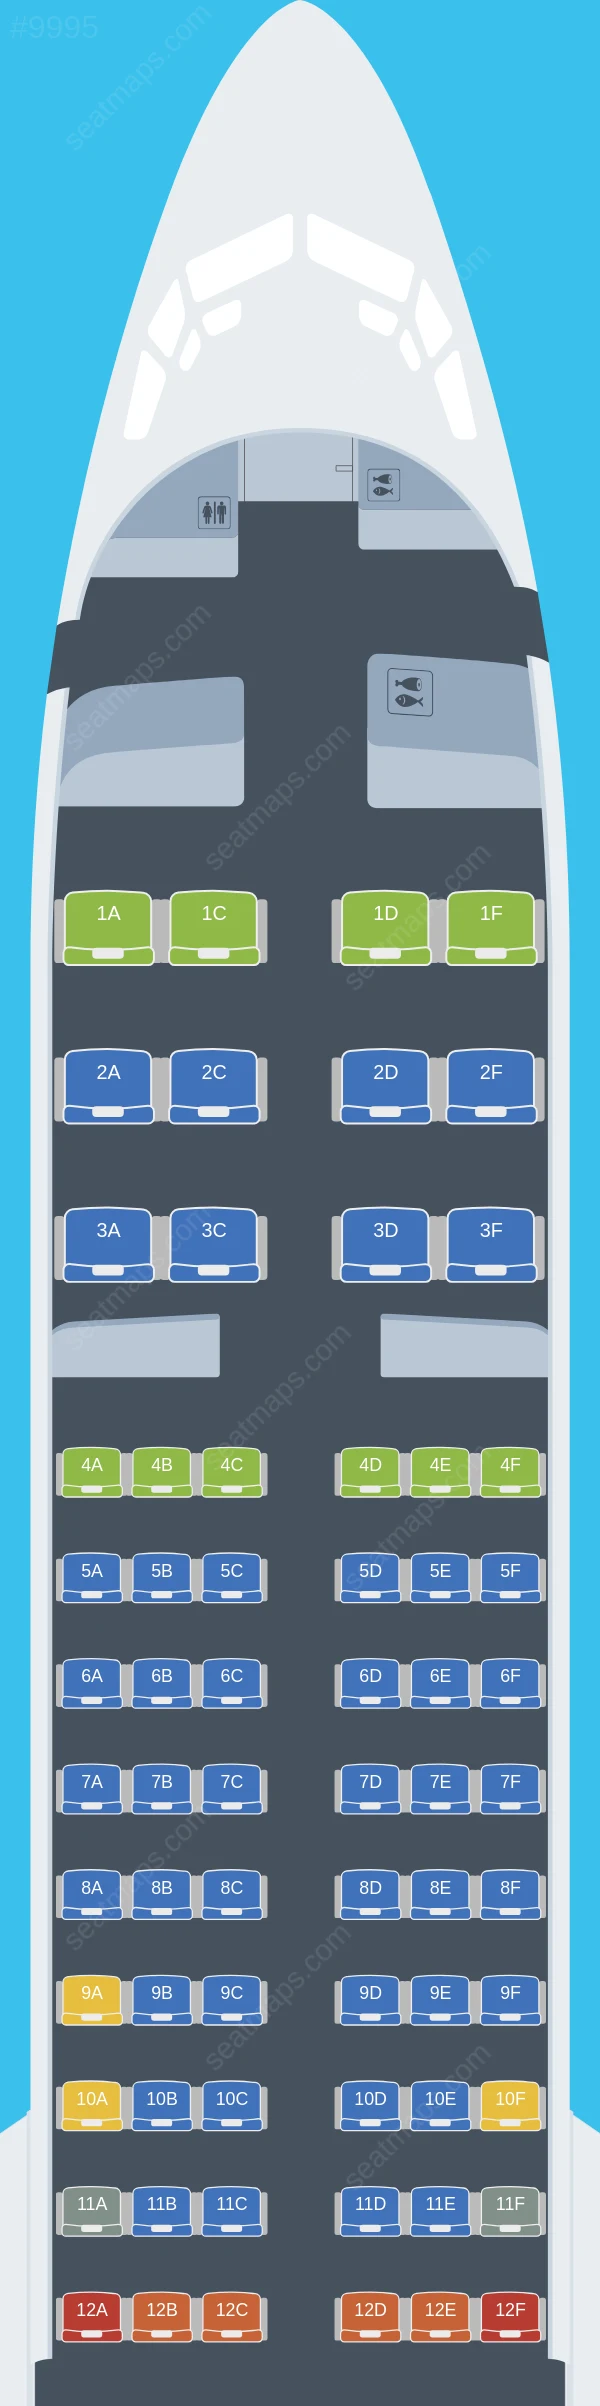 Belavia Boeing 737 MAX 8 seatmap preview